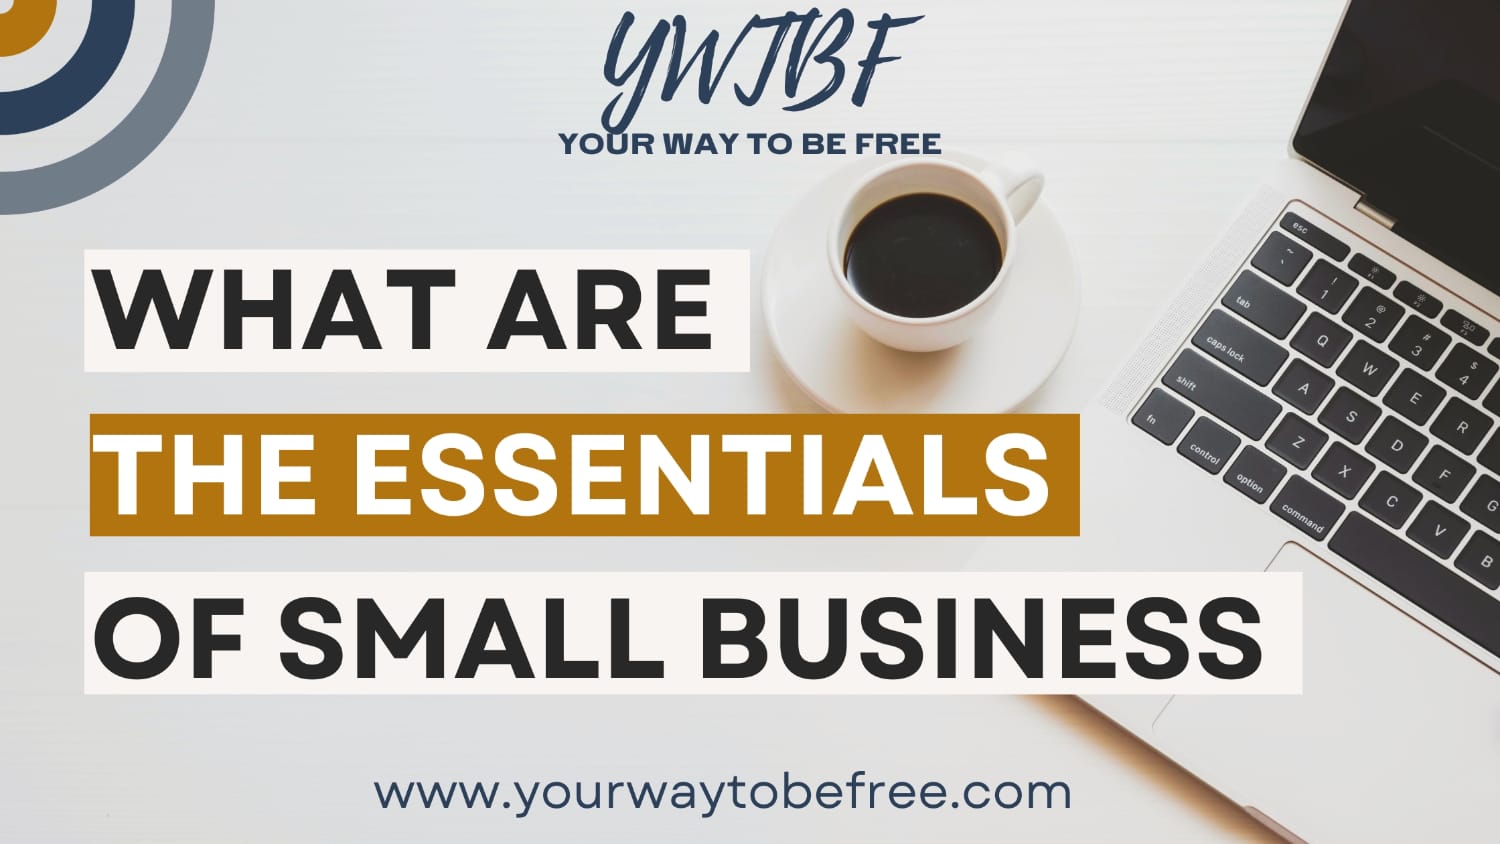 What Are The Essentials Of Small Business - Your Way To Be Free